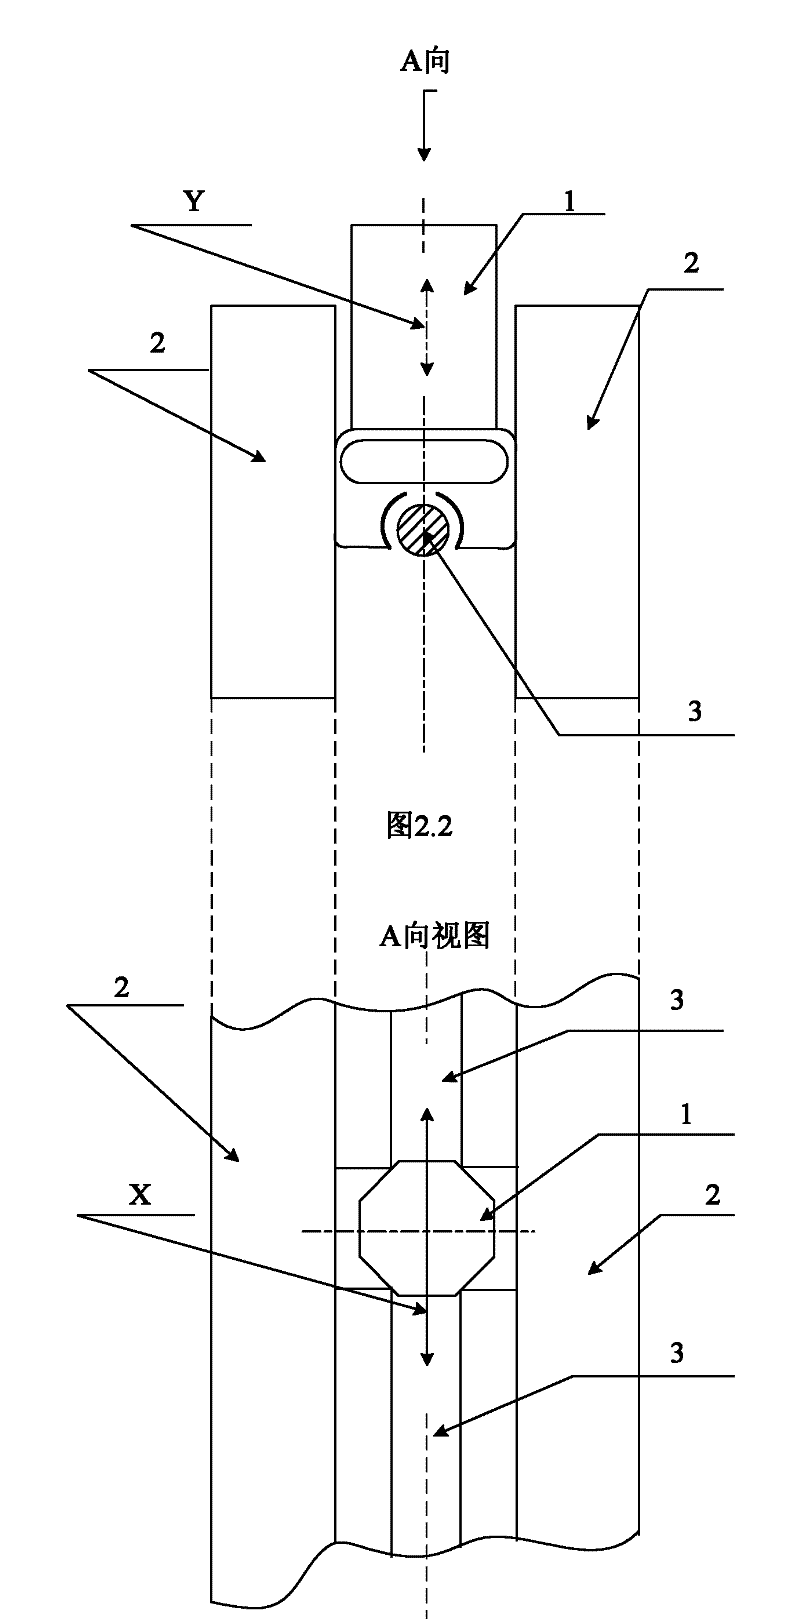 Impedance adjuster for multi-parameter measurement of microwave network in the state of microwave large signal